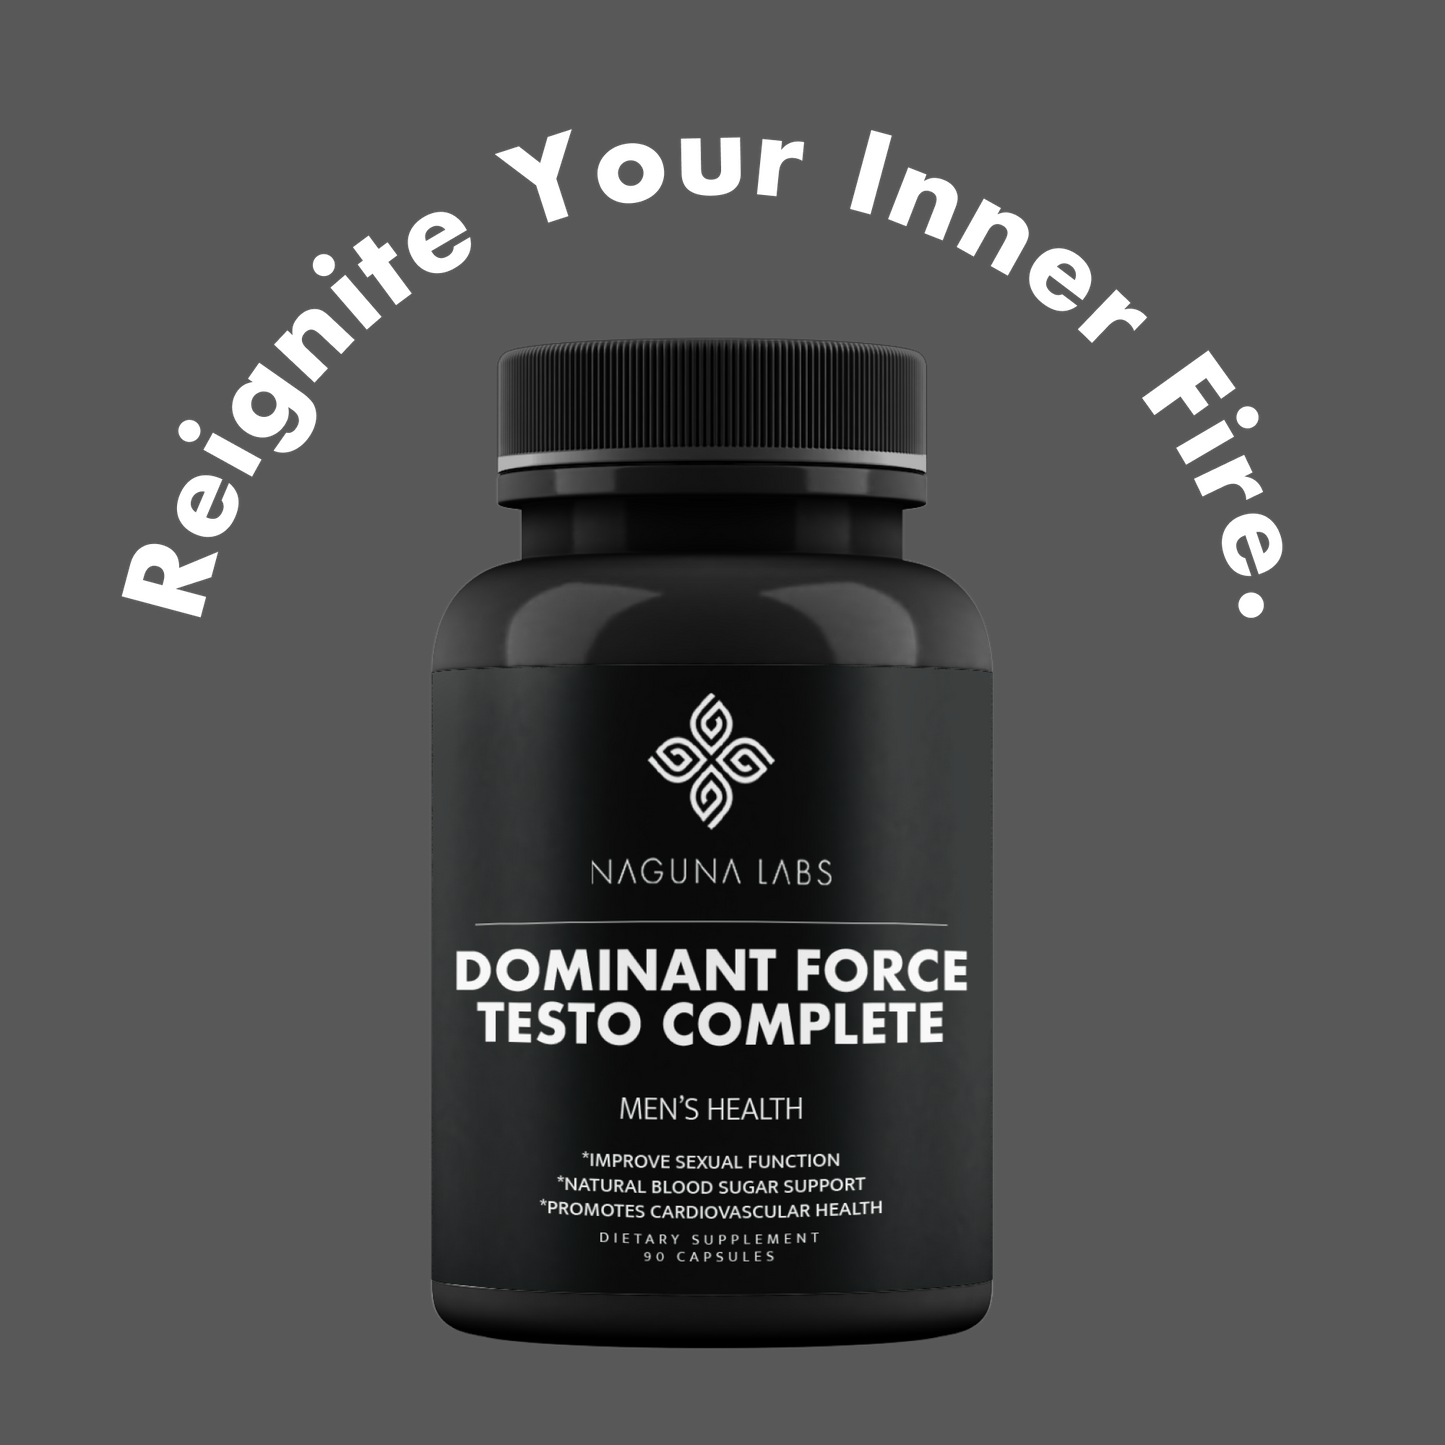 DOMINANT FORCE TESTO COMPLETE